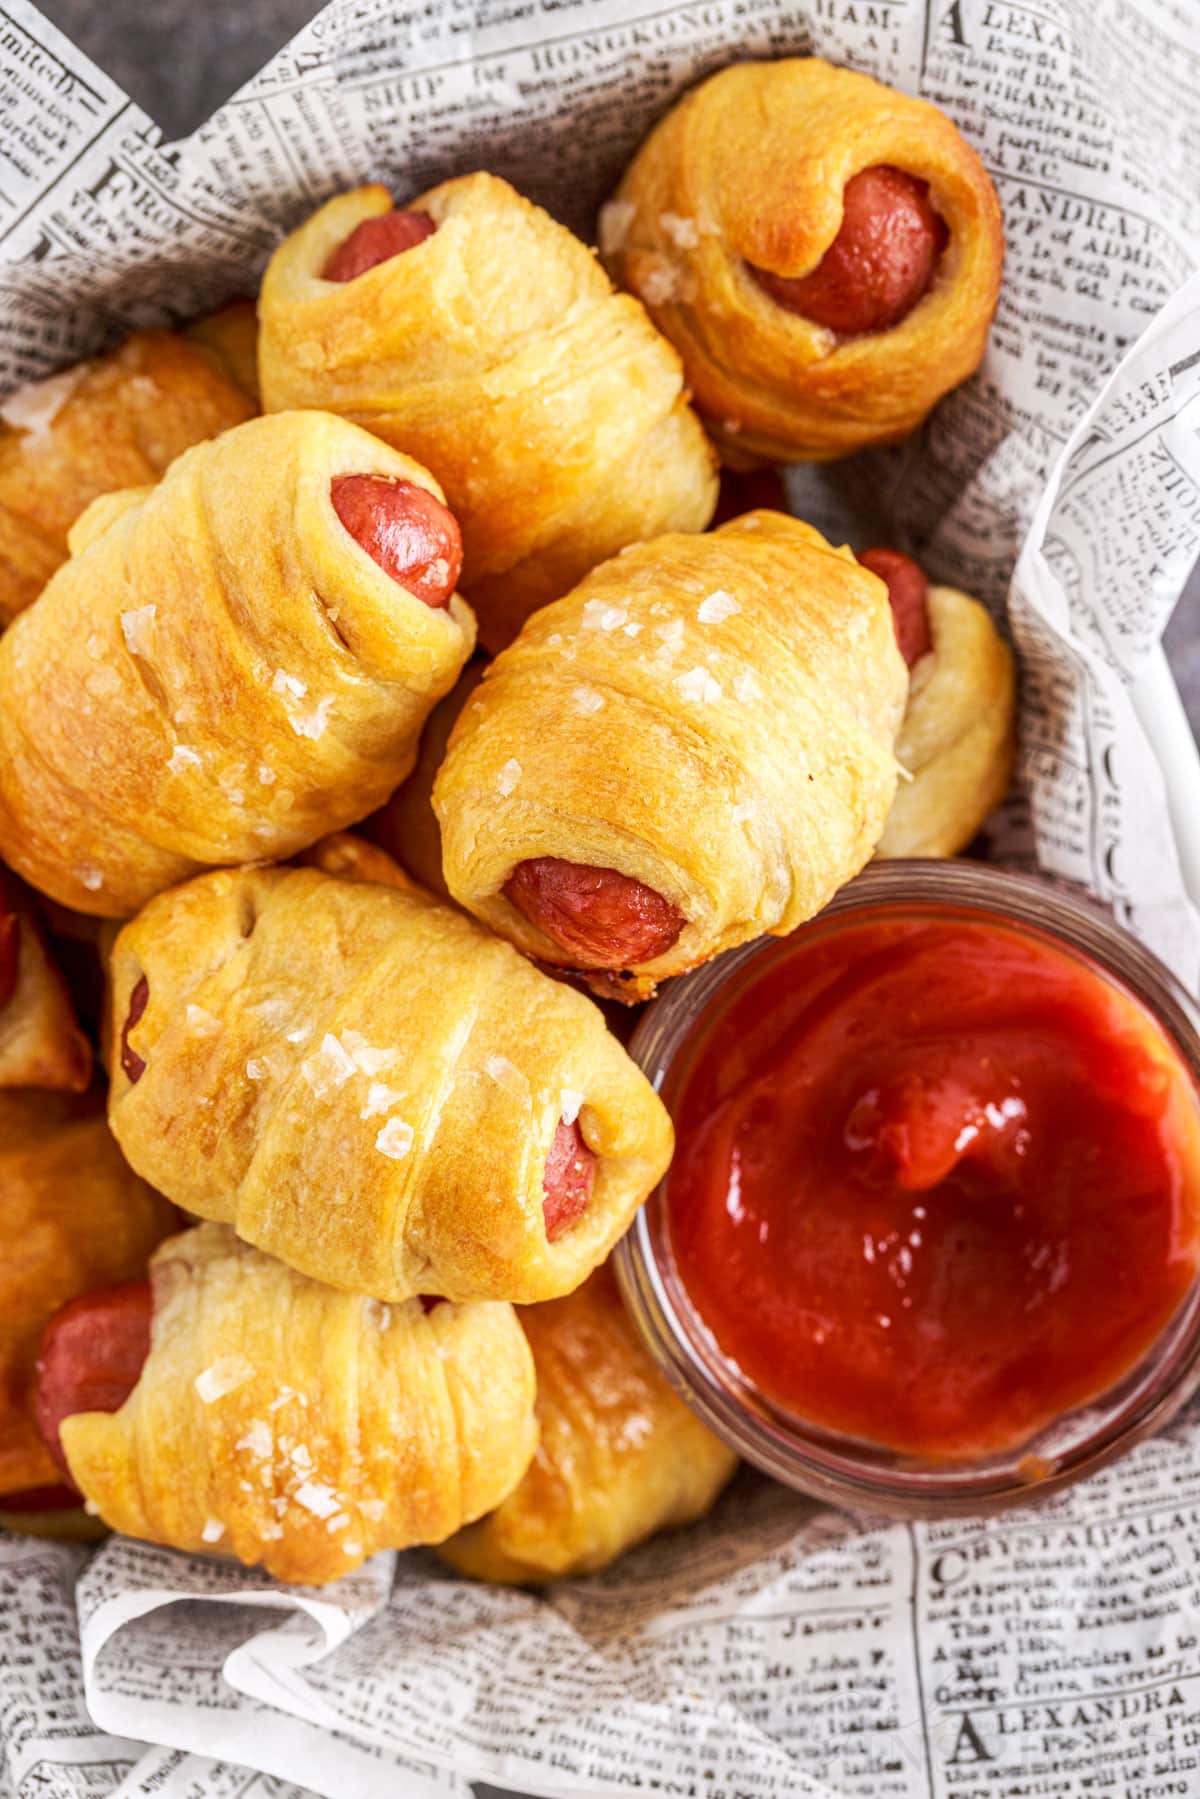 paper lined basket of lil smokies pigs in a blanket with a small dish of ketchup